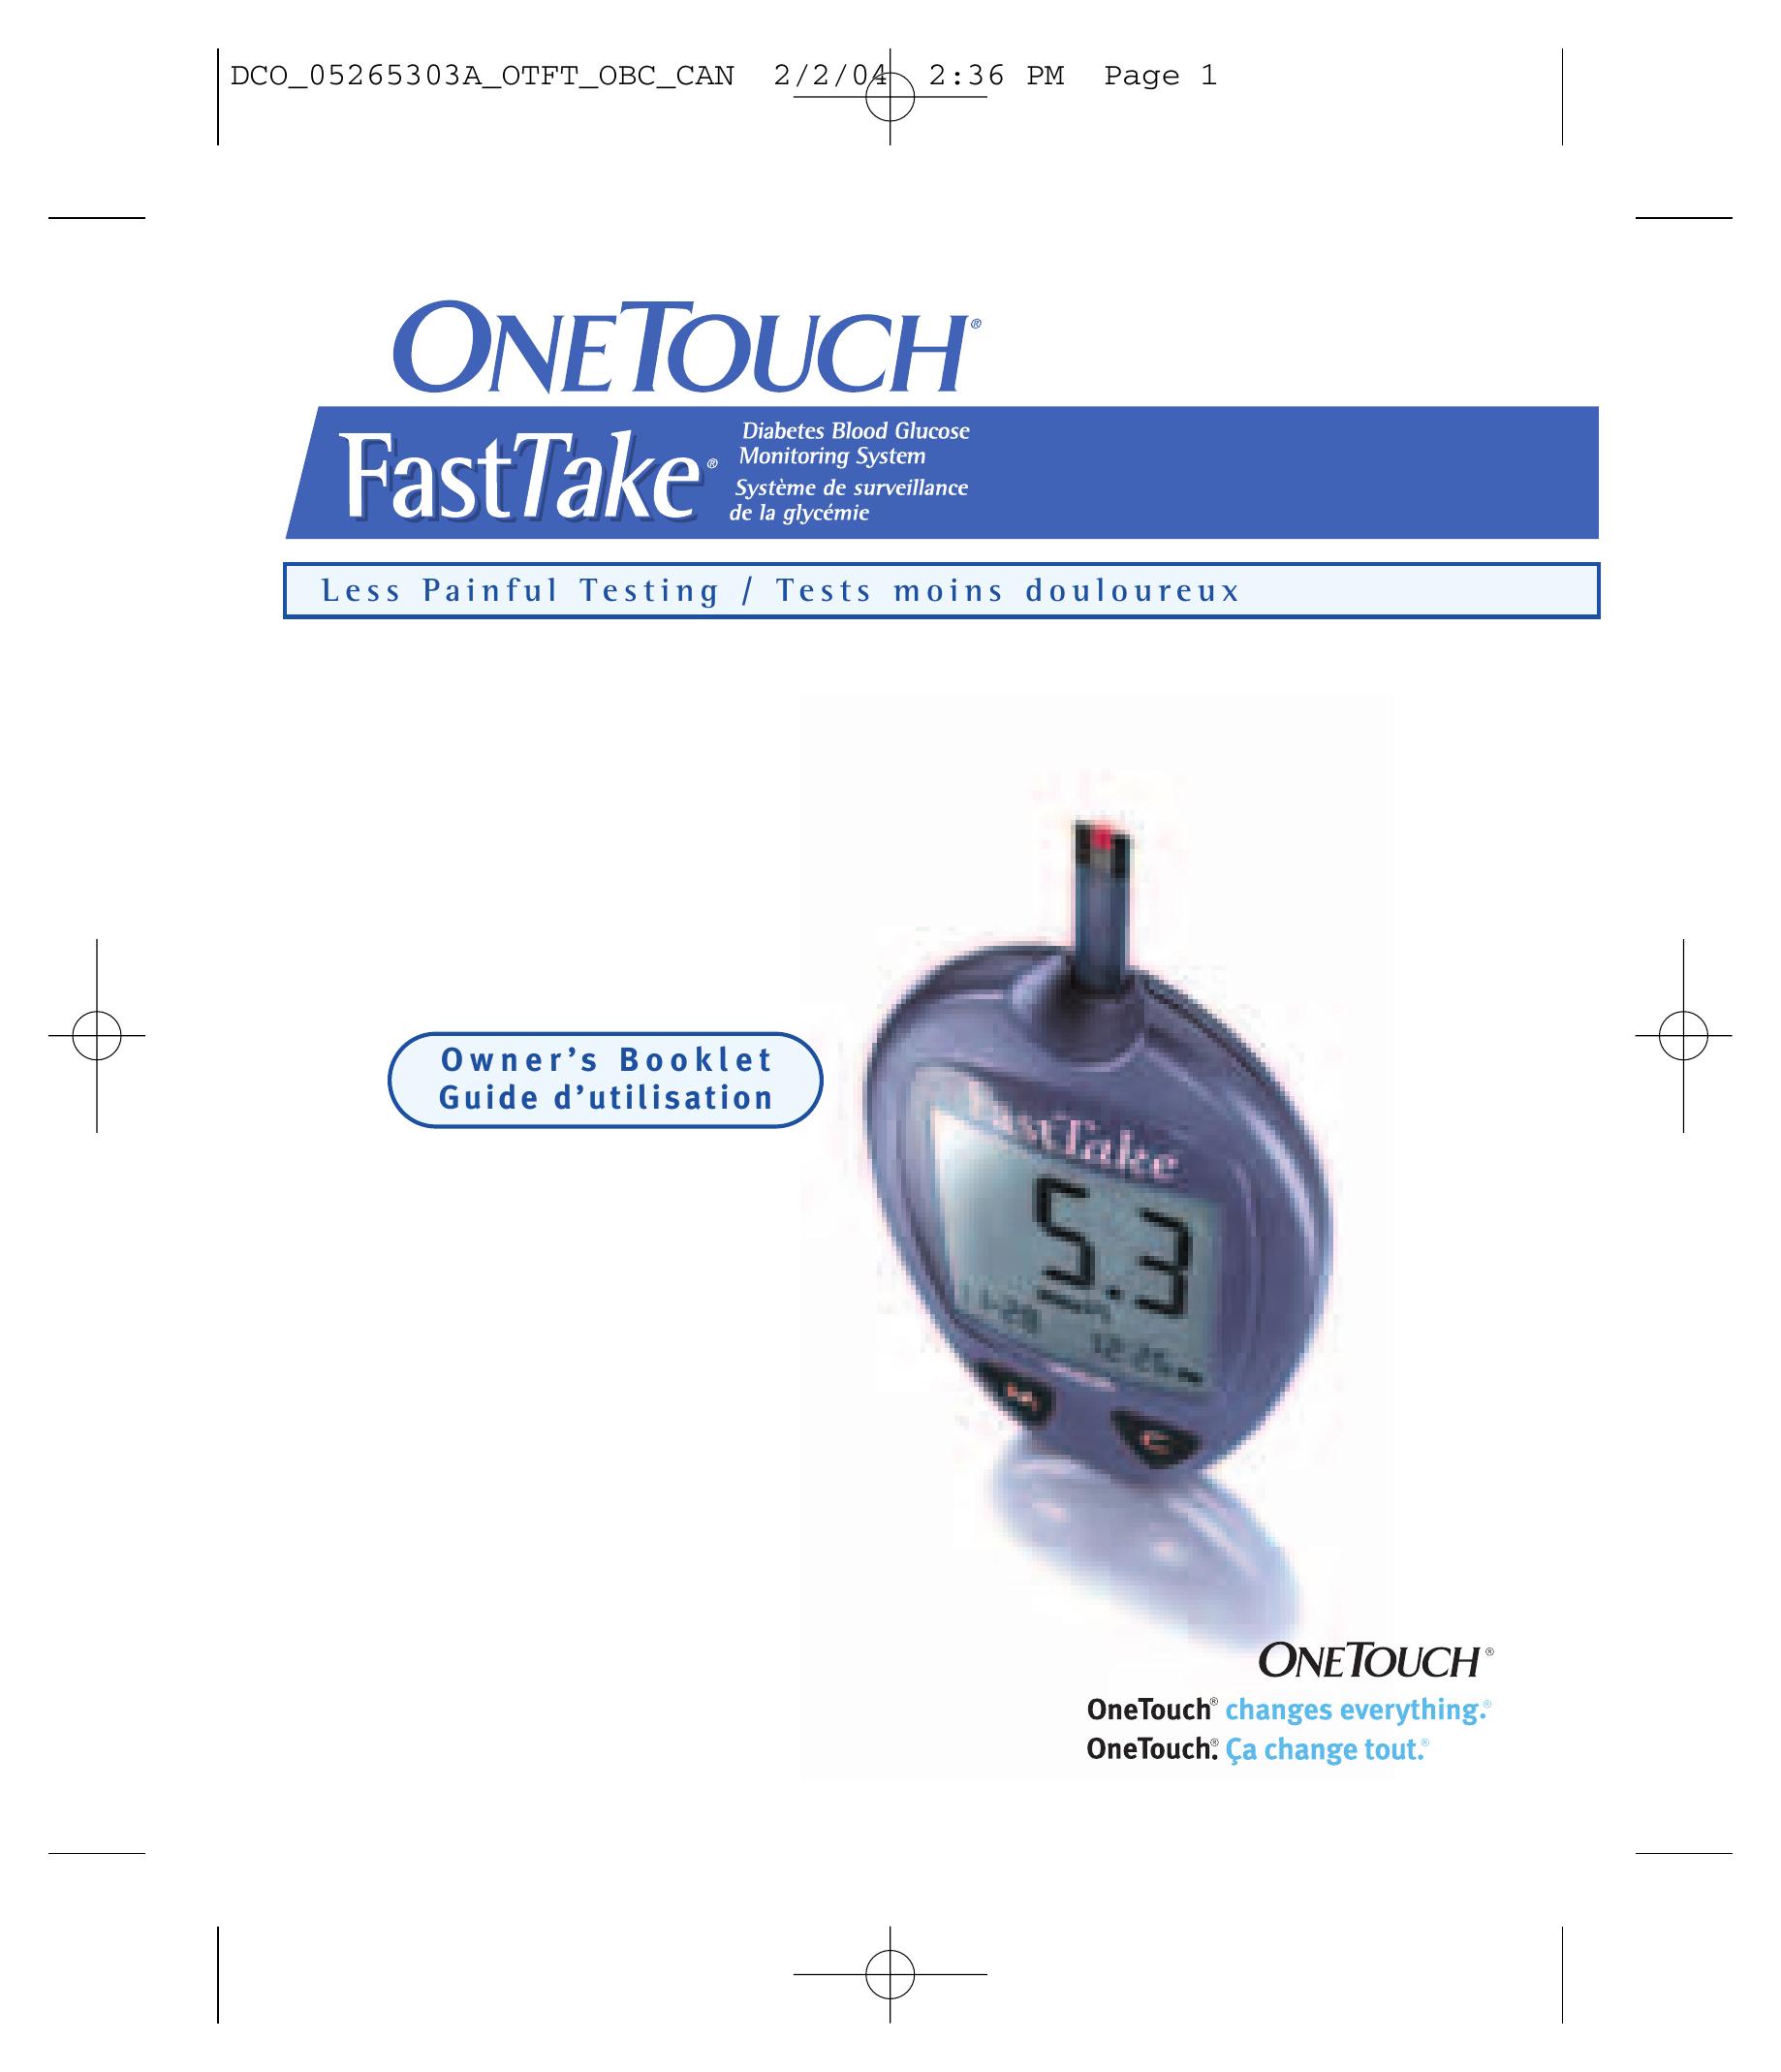 Lifescan OneTouch Blood Glucose Meter User Manual